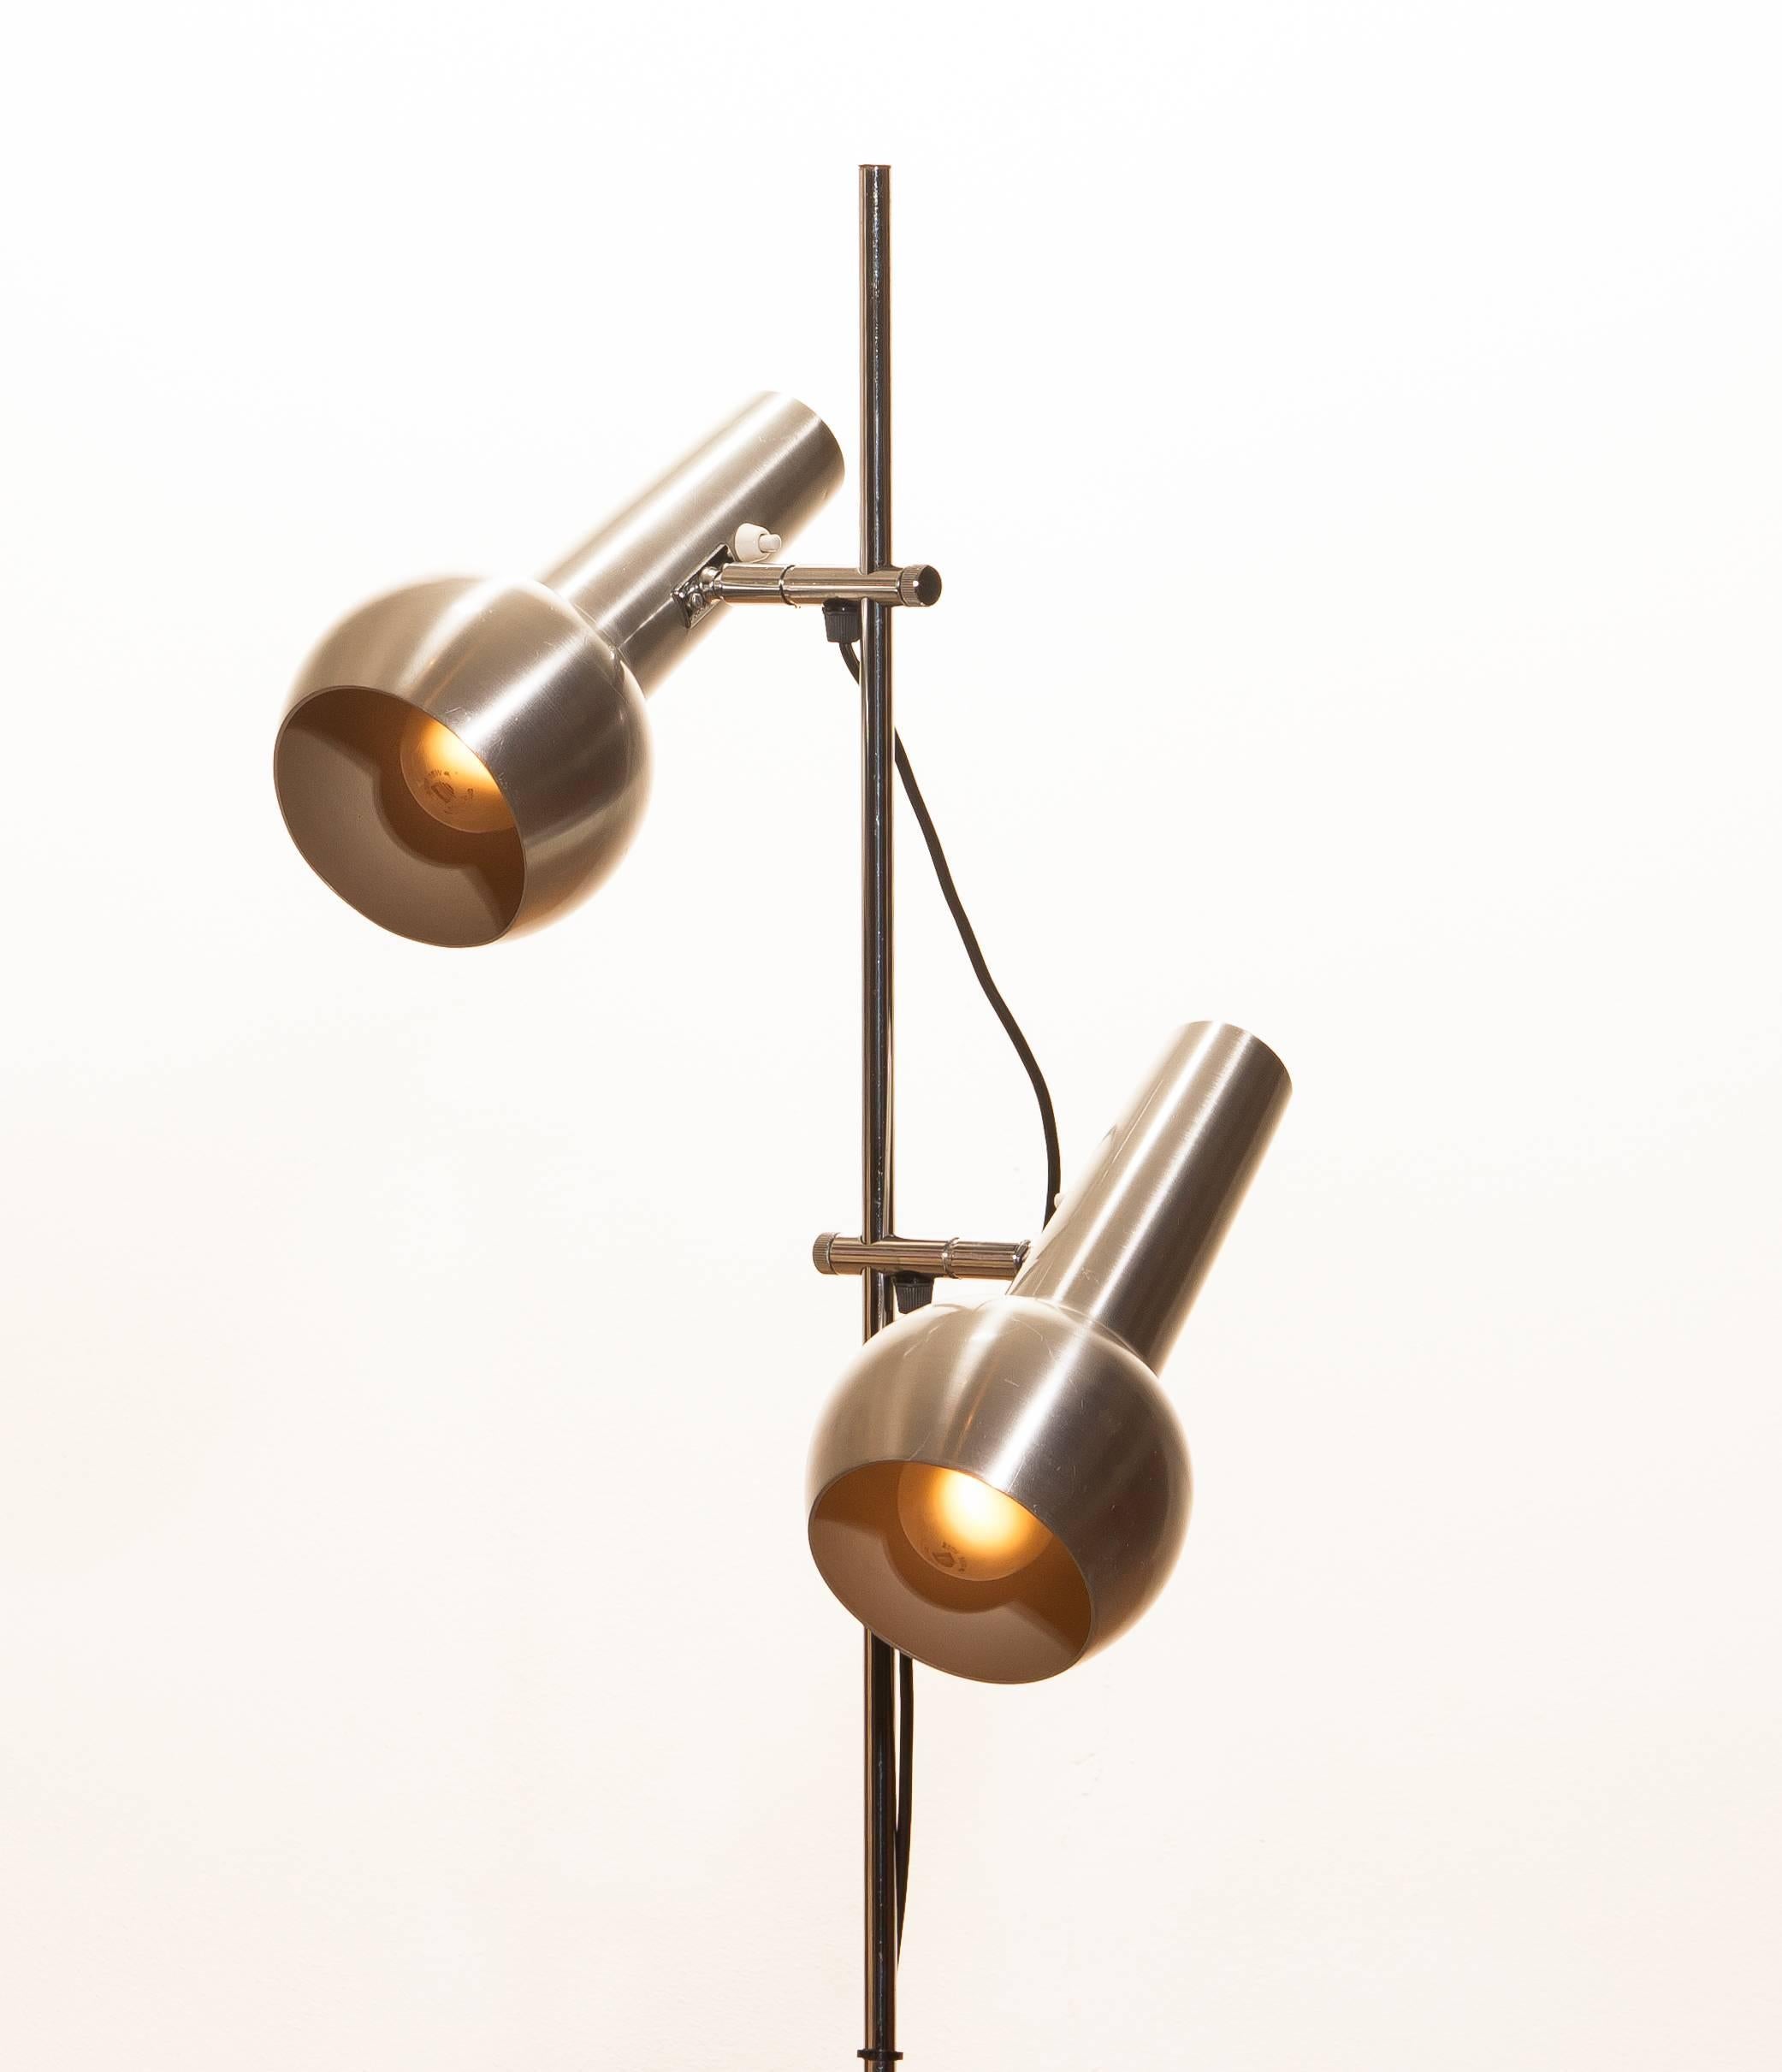 Central American Chrome and Aluminium Double Shade Floor Lamp by Koch & Lowy from the 1970s, US